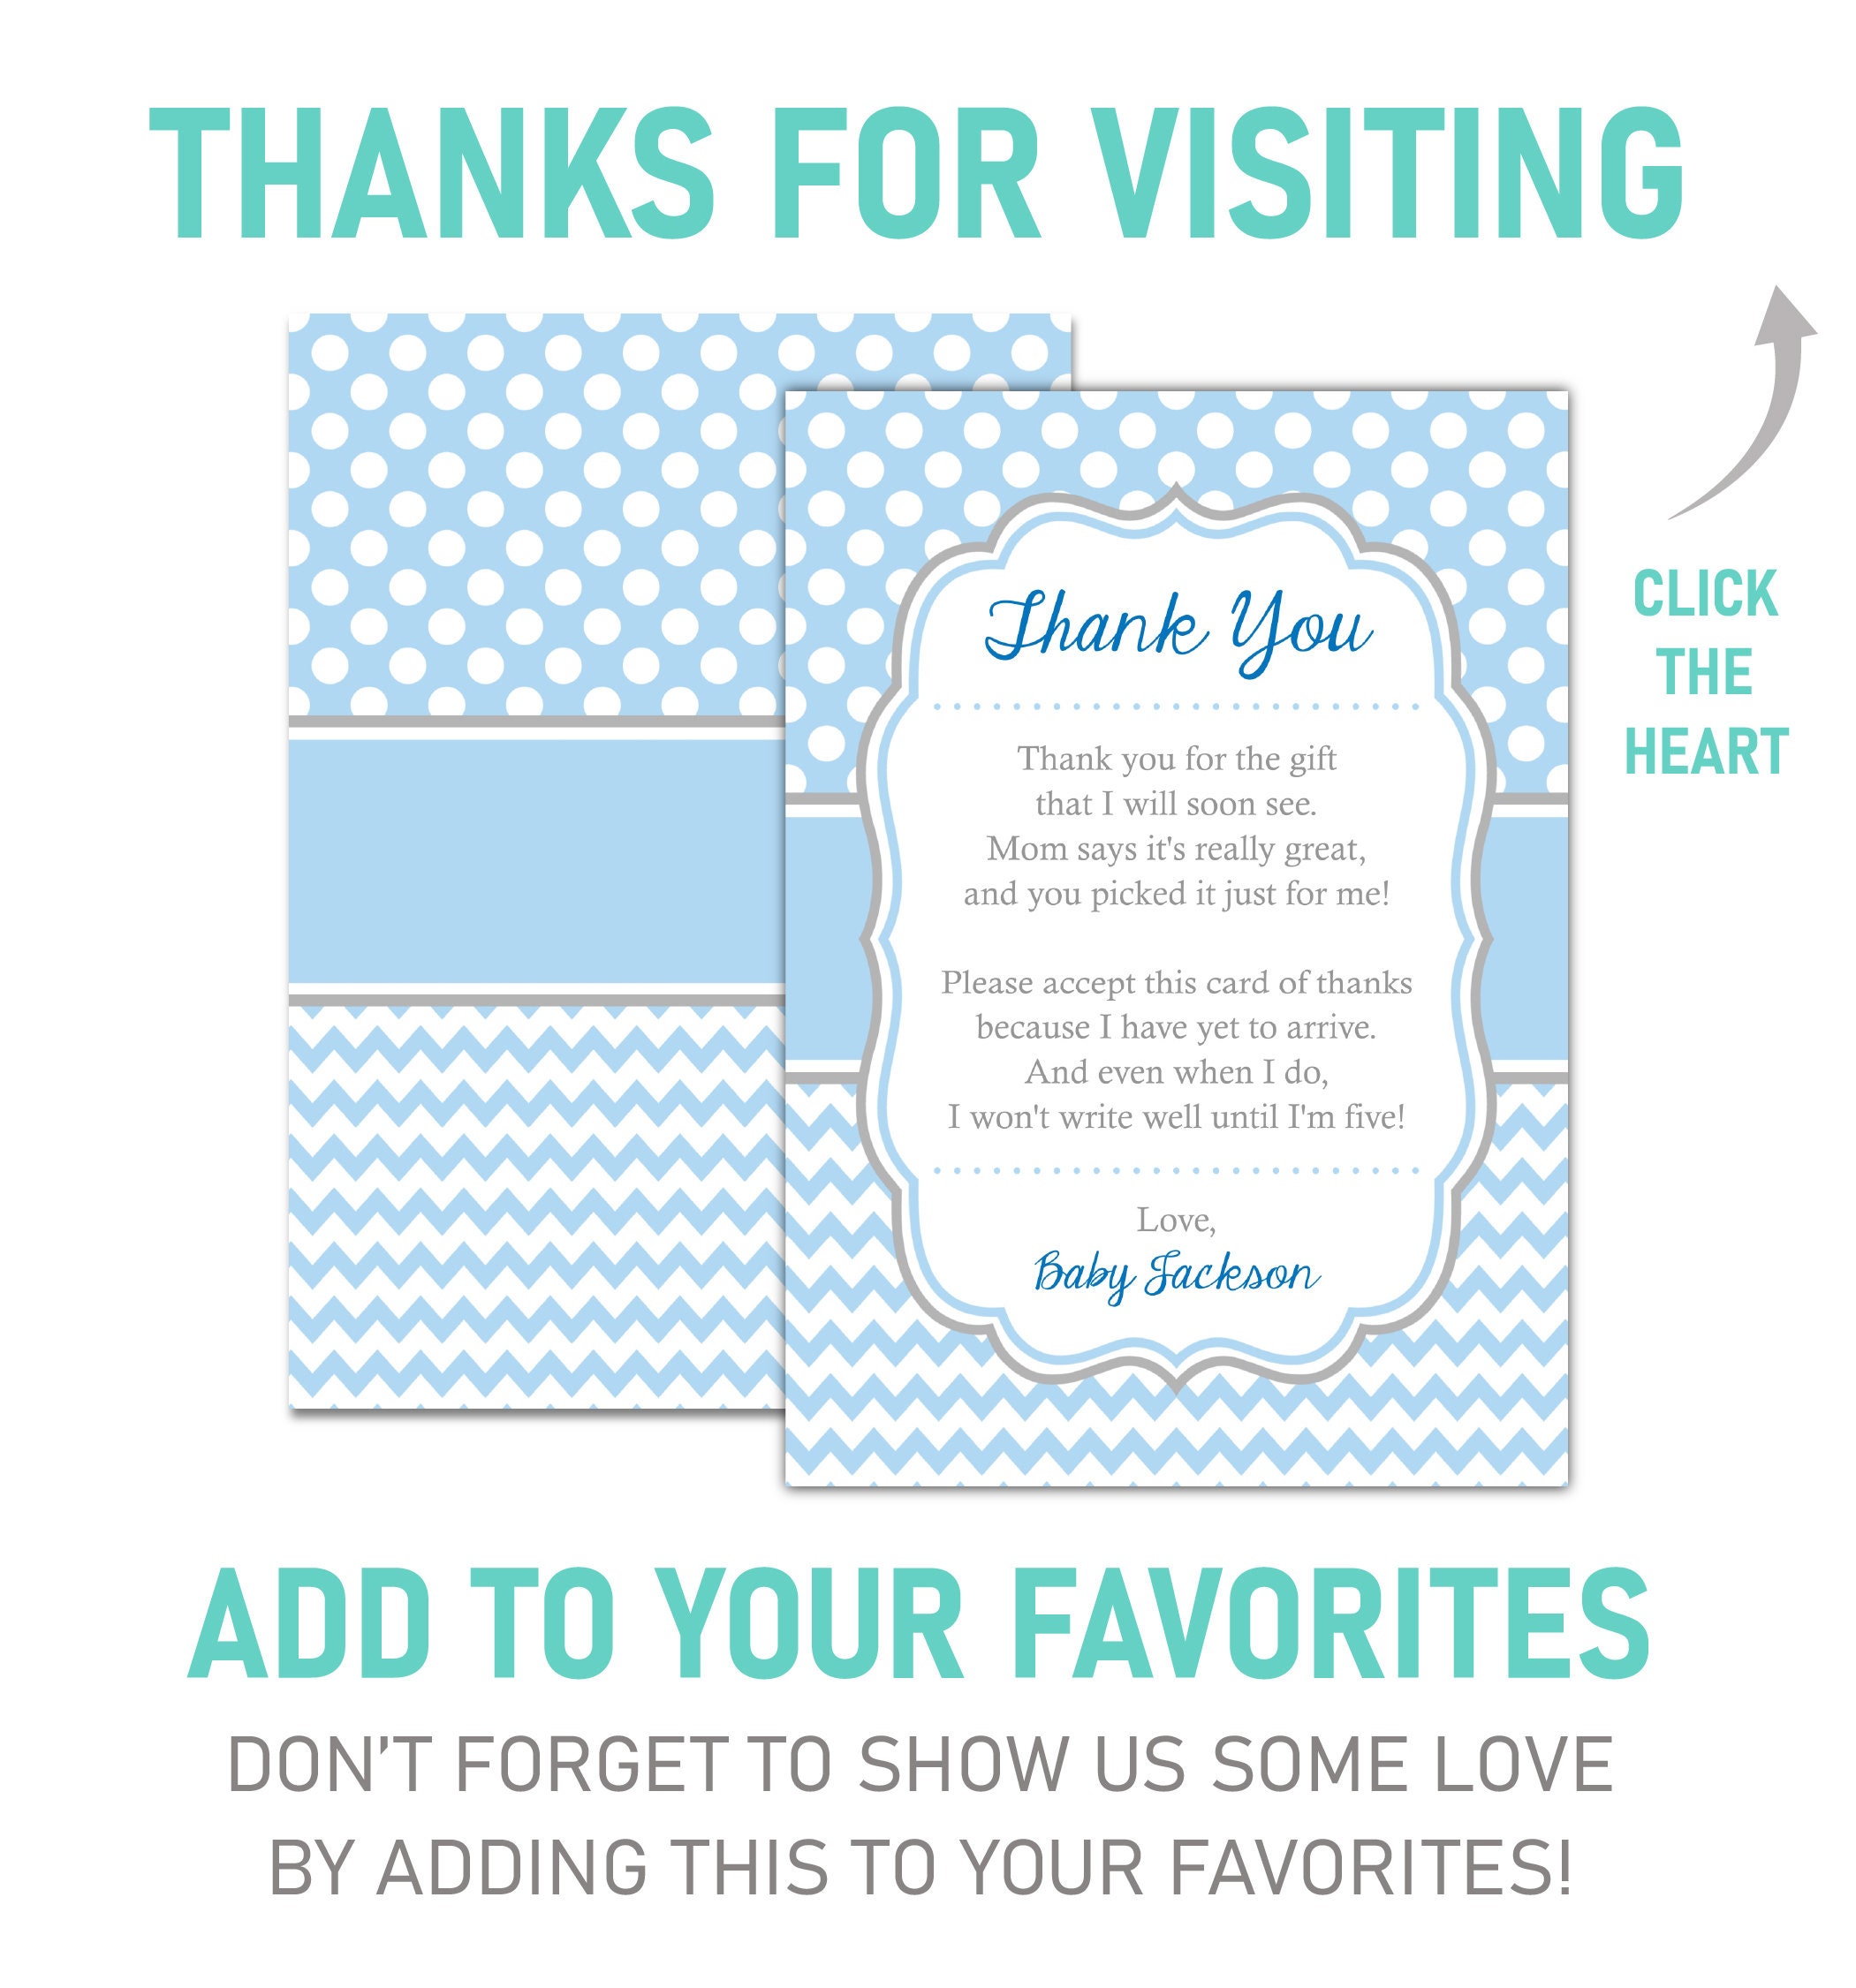 Little Man THANK YOU card boy mint green gray color baby shower gentleman  theme printable, digital files jpg pdf, instant download - lm001